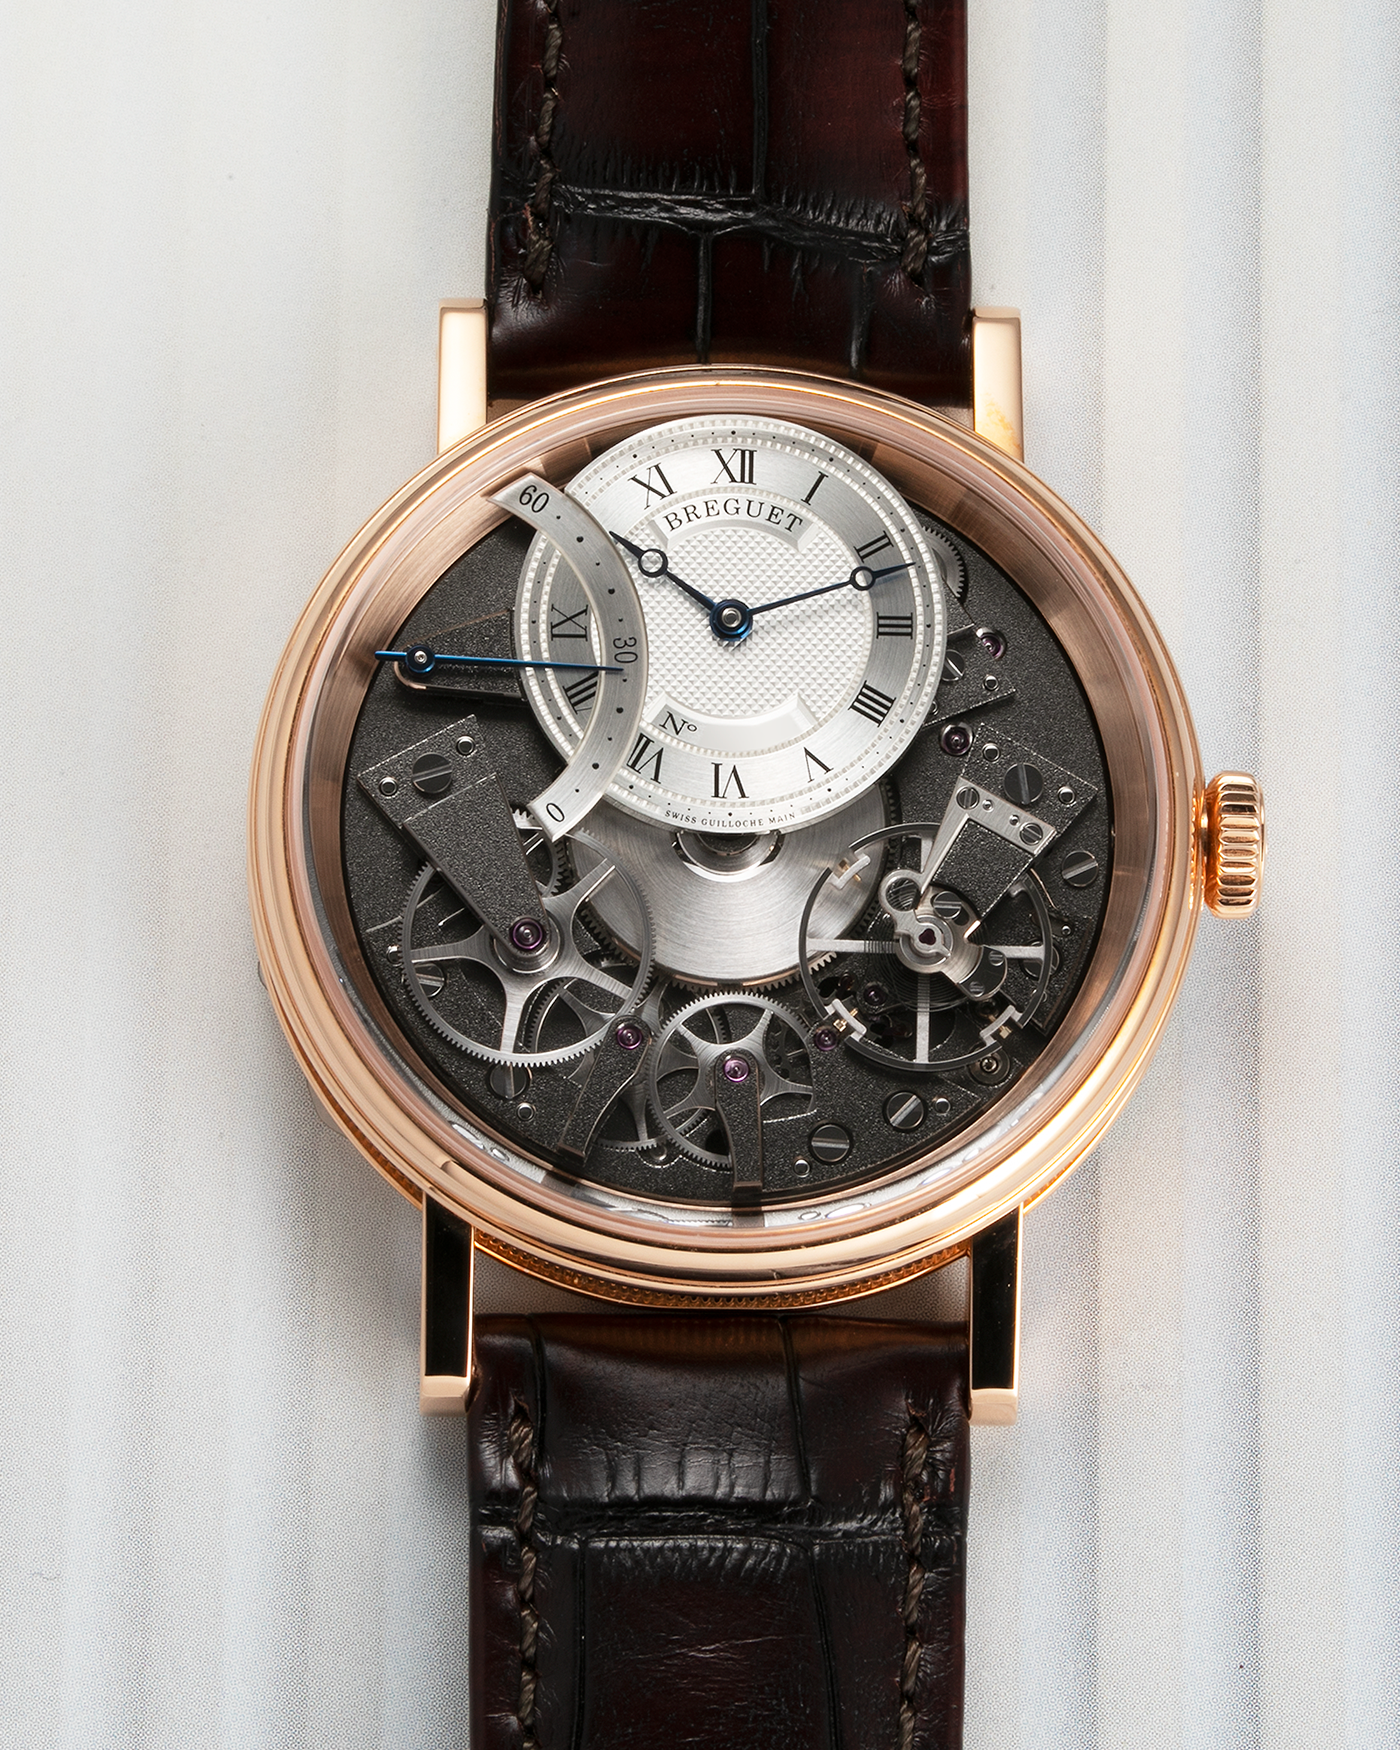 Brand: Breguet Year: 2022 Model: Tradition Automatique Seconde Retrograde Reference: 7097 Material: 18-carat Rose Gold Movement: Breguet Cal. 505 SR1, Self-Winding Case Diameter: 40mm Strap: Breguet Medium Brown Alligator Strap with signed 18-carat Rose Gold Tang Buckle